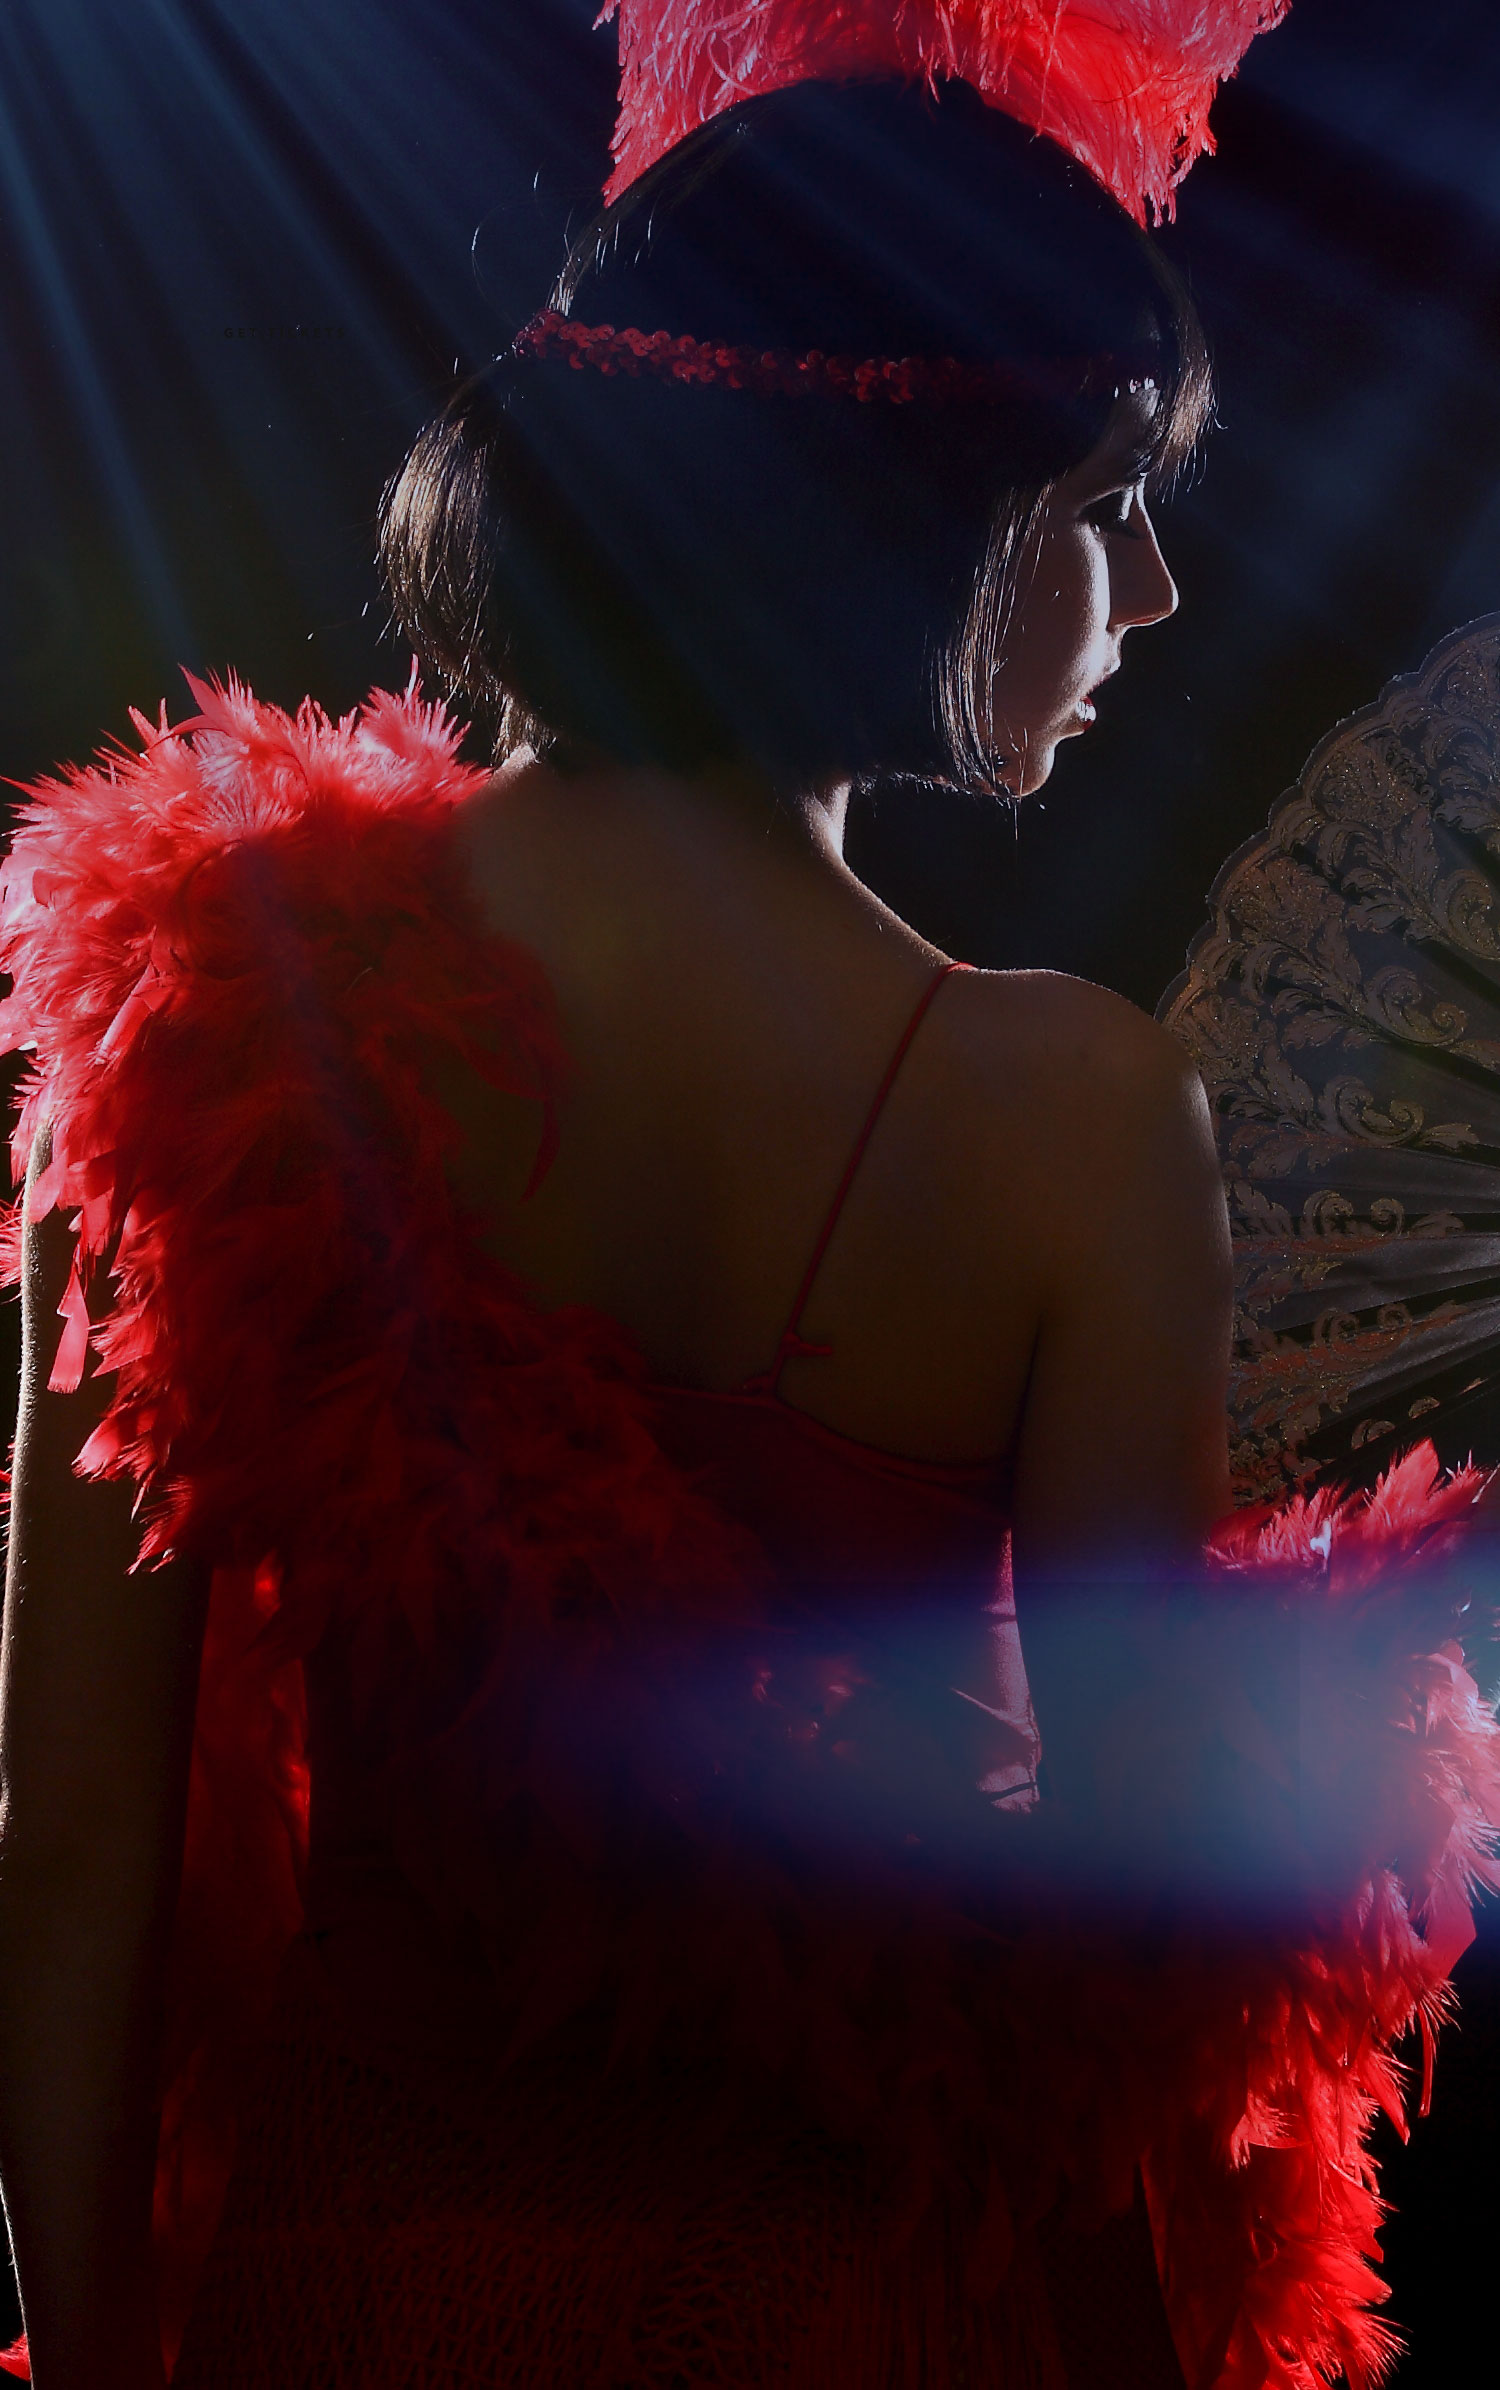 Burlesque dancer with feathers turned around